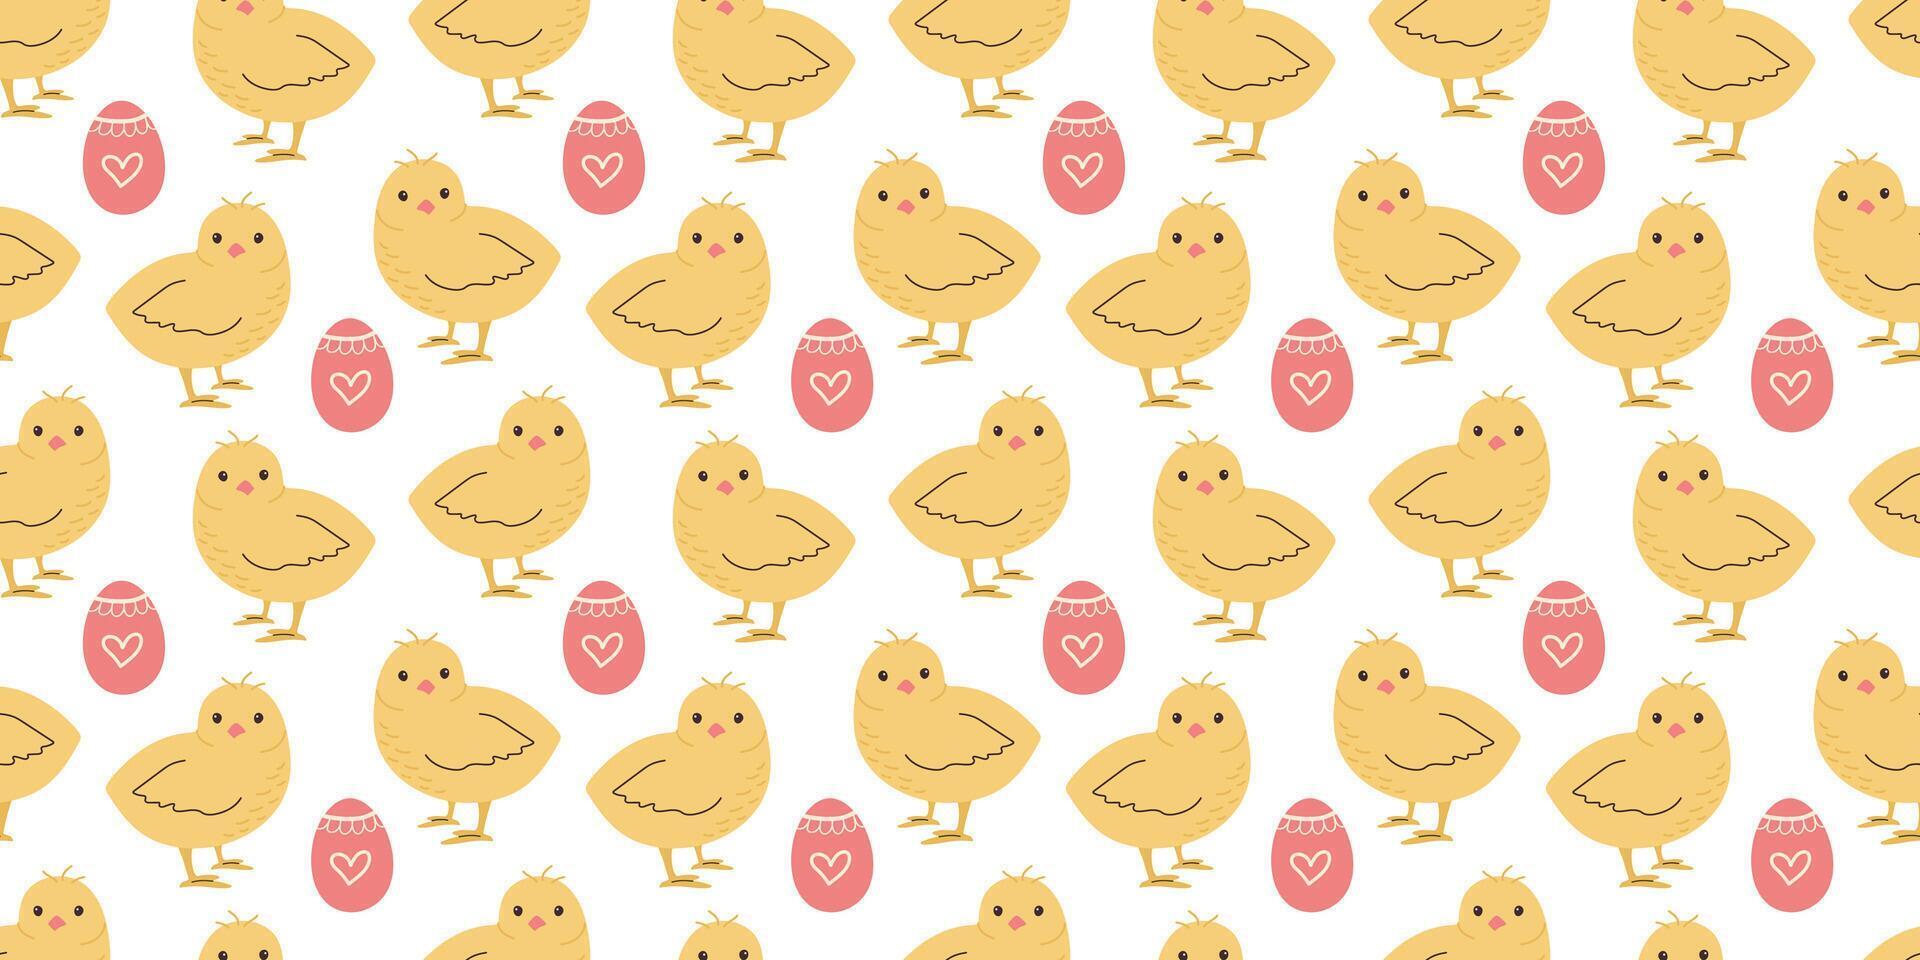 Seamless pattern with Chicken and Eggs. Easter design for wrapping paper and backgrounds. Hand drawn illustration of Chick bird in kawaii style vector